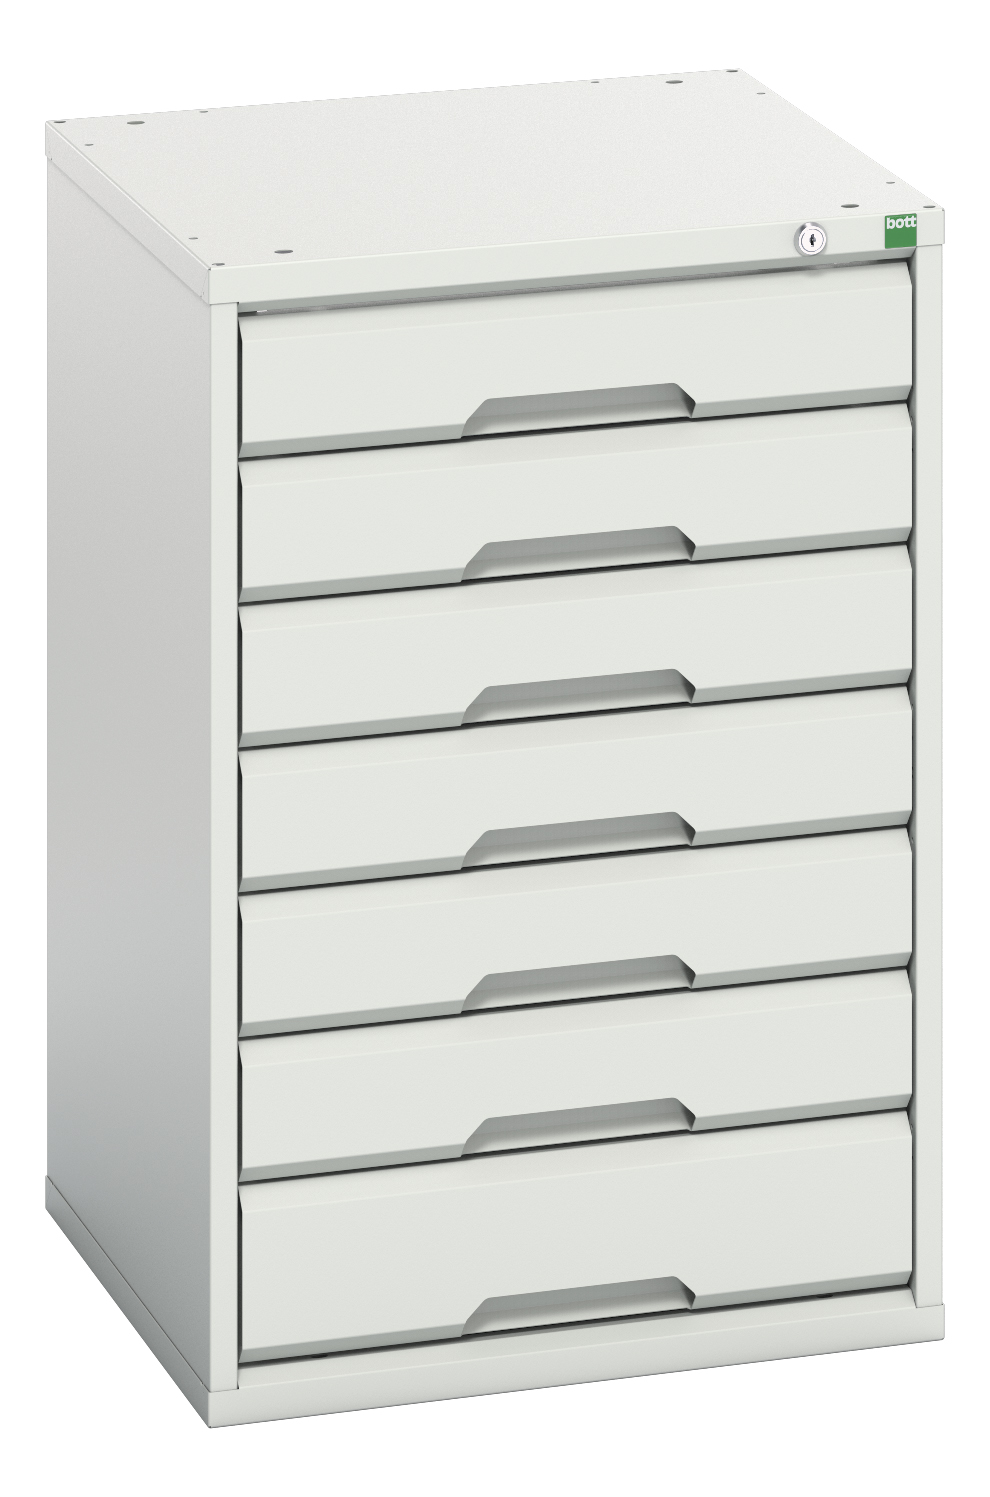 Bott Verso Drawer Cabinet With 7 Drawers - 16925015.16